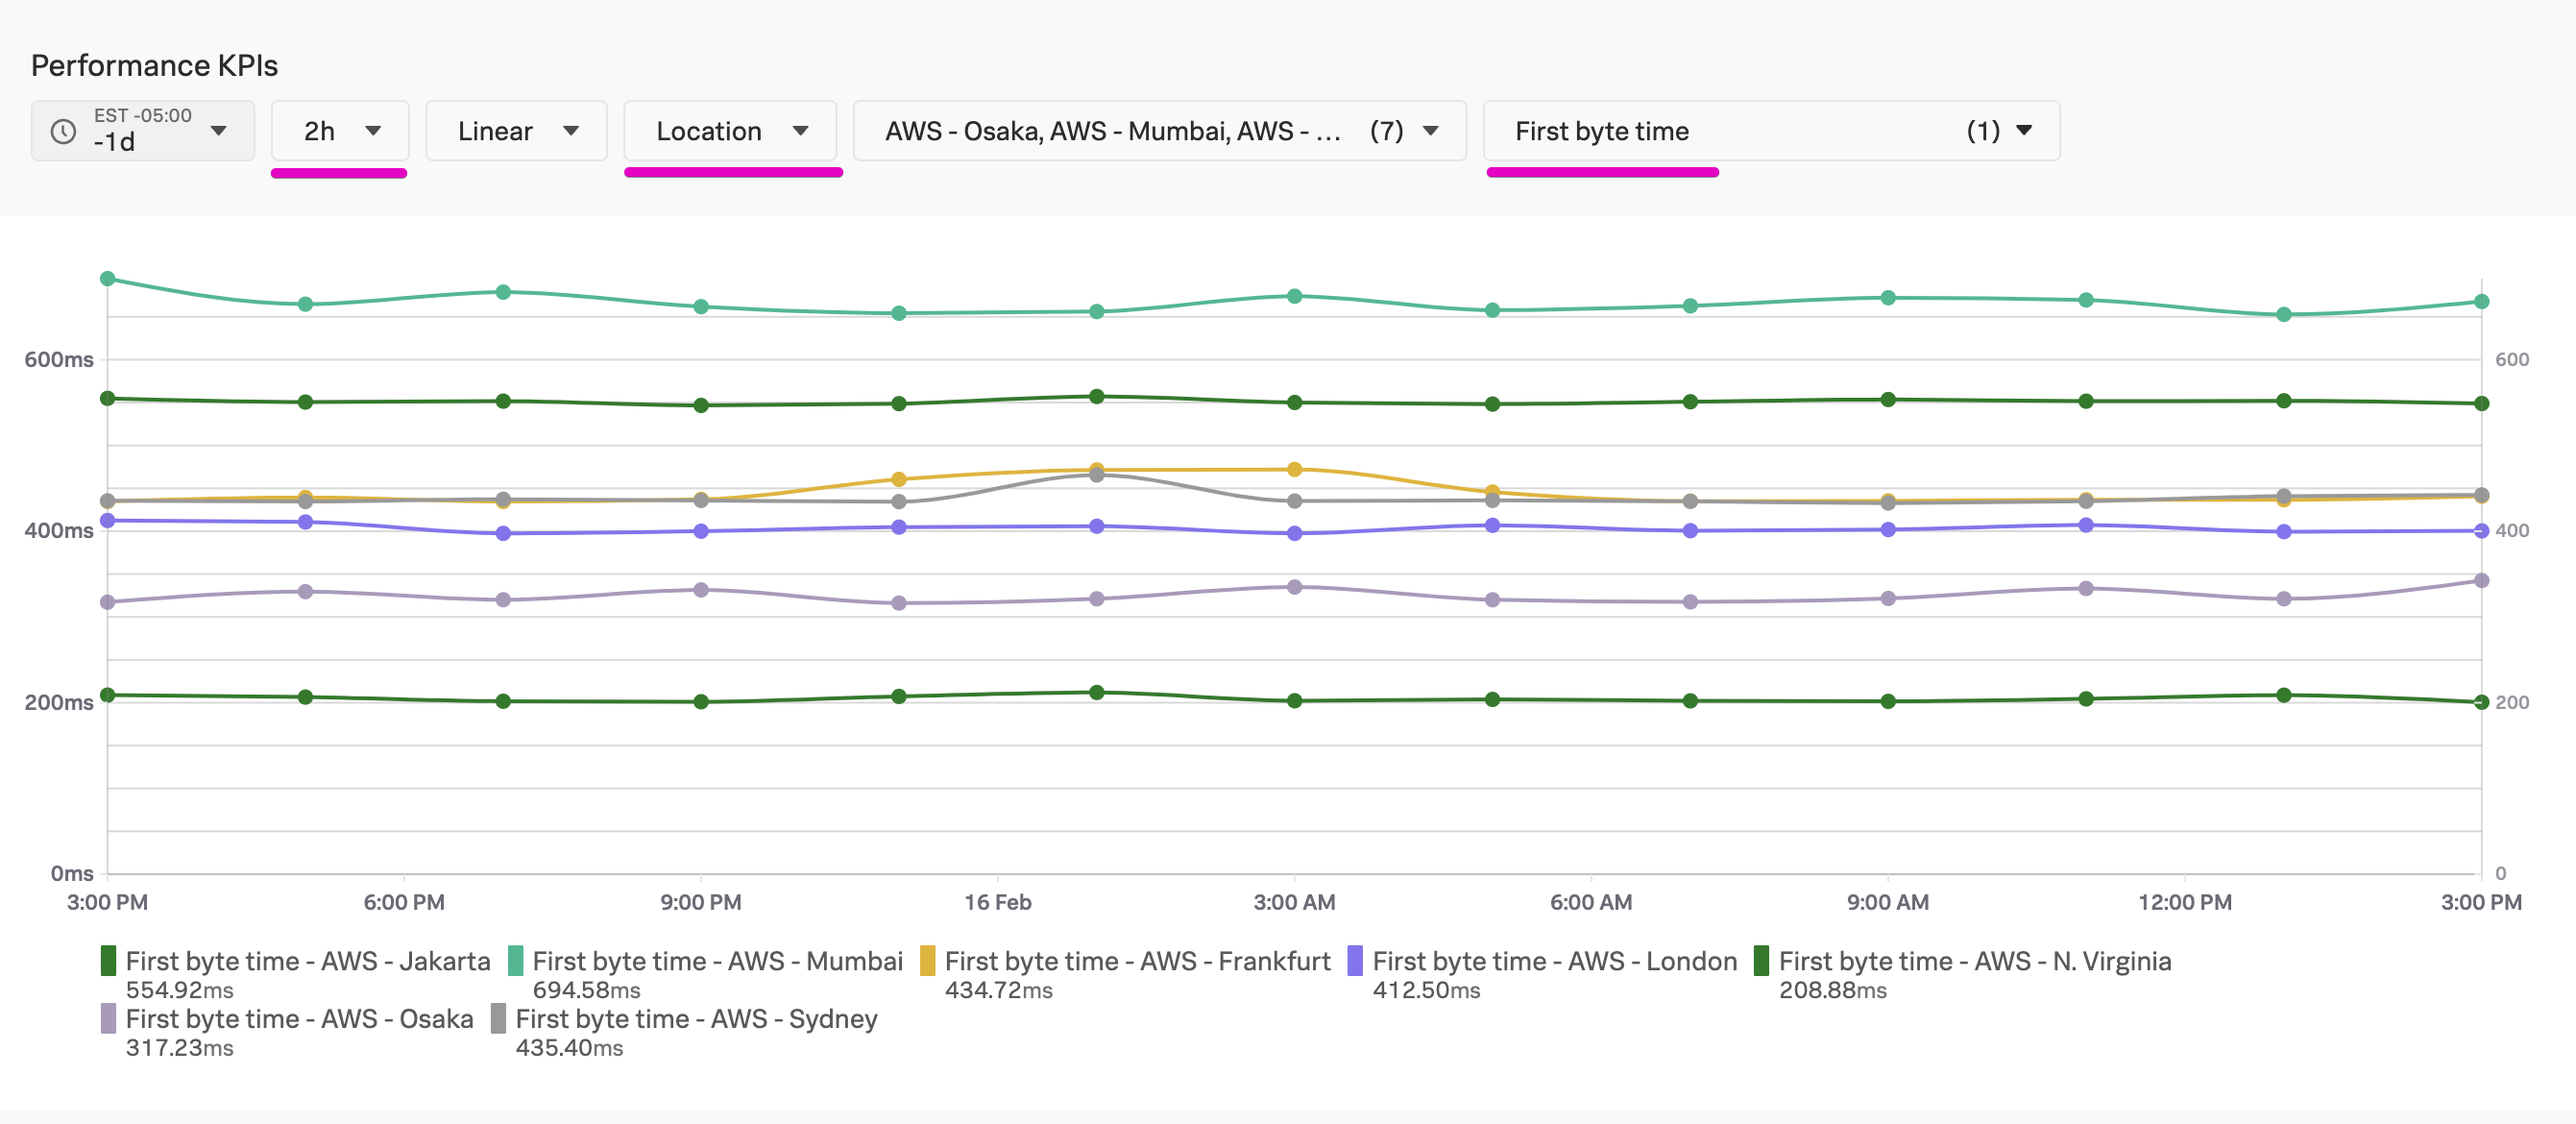 Performance KPIs for Uptime Tests